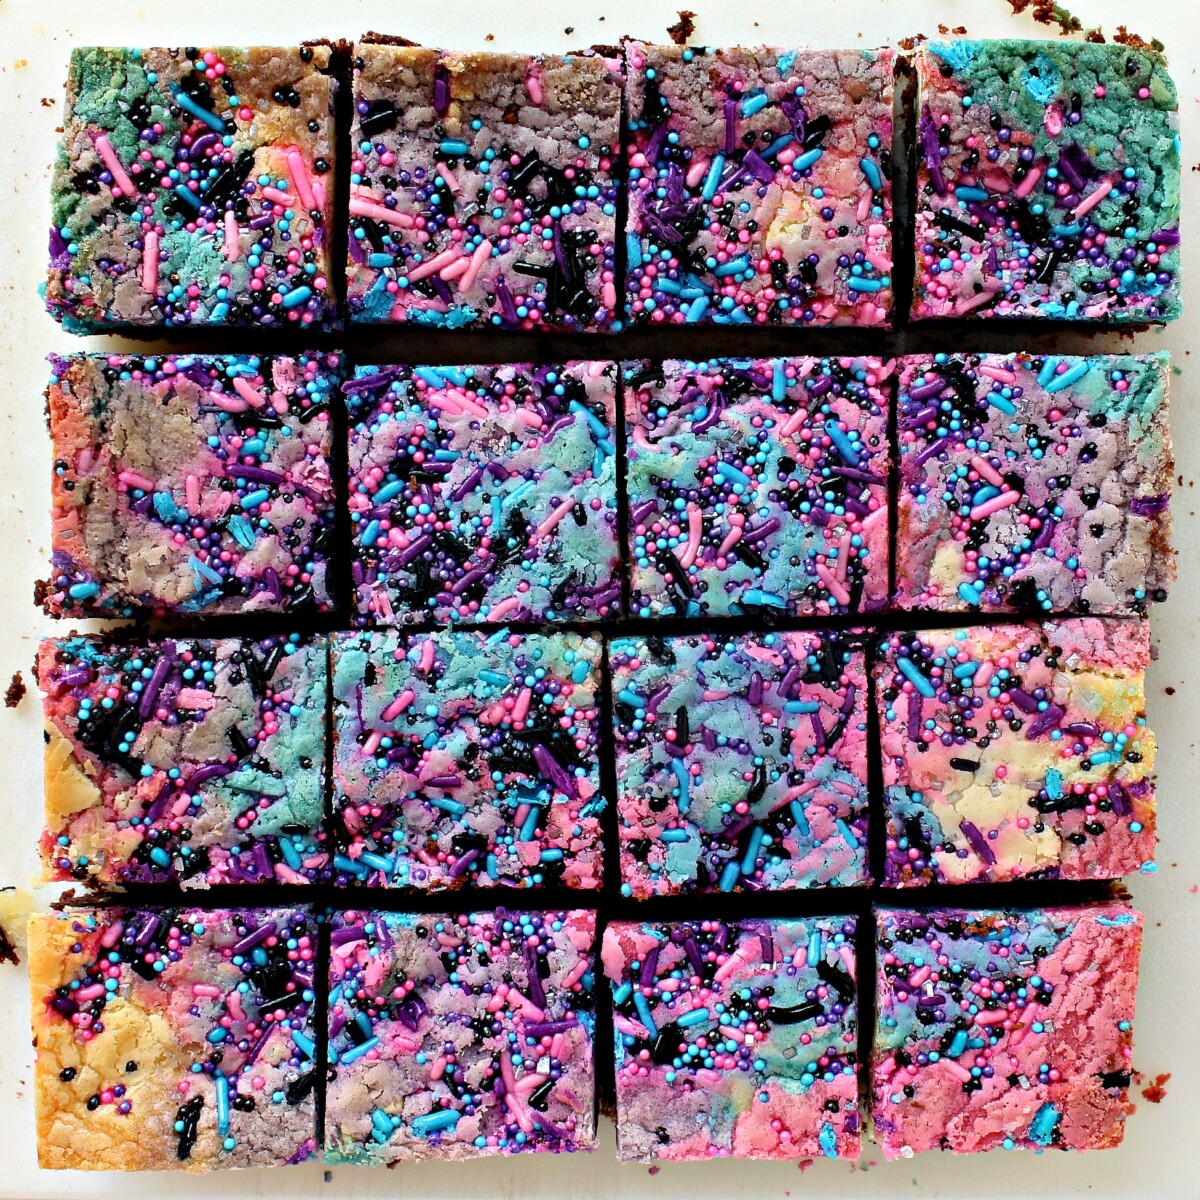 Colorful Galaxy Brownies topped with sprinkles.